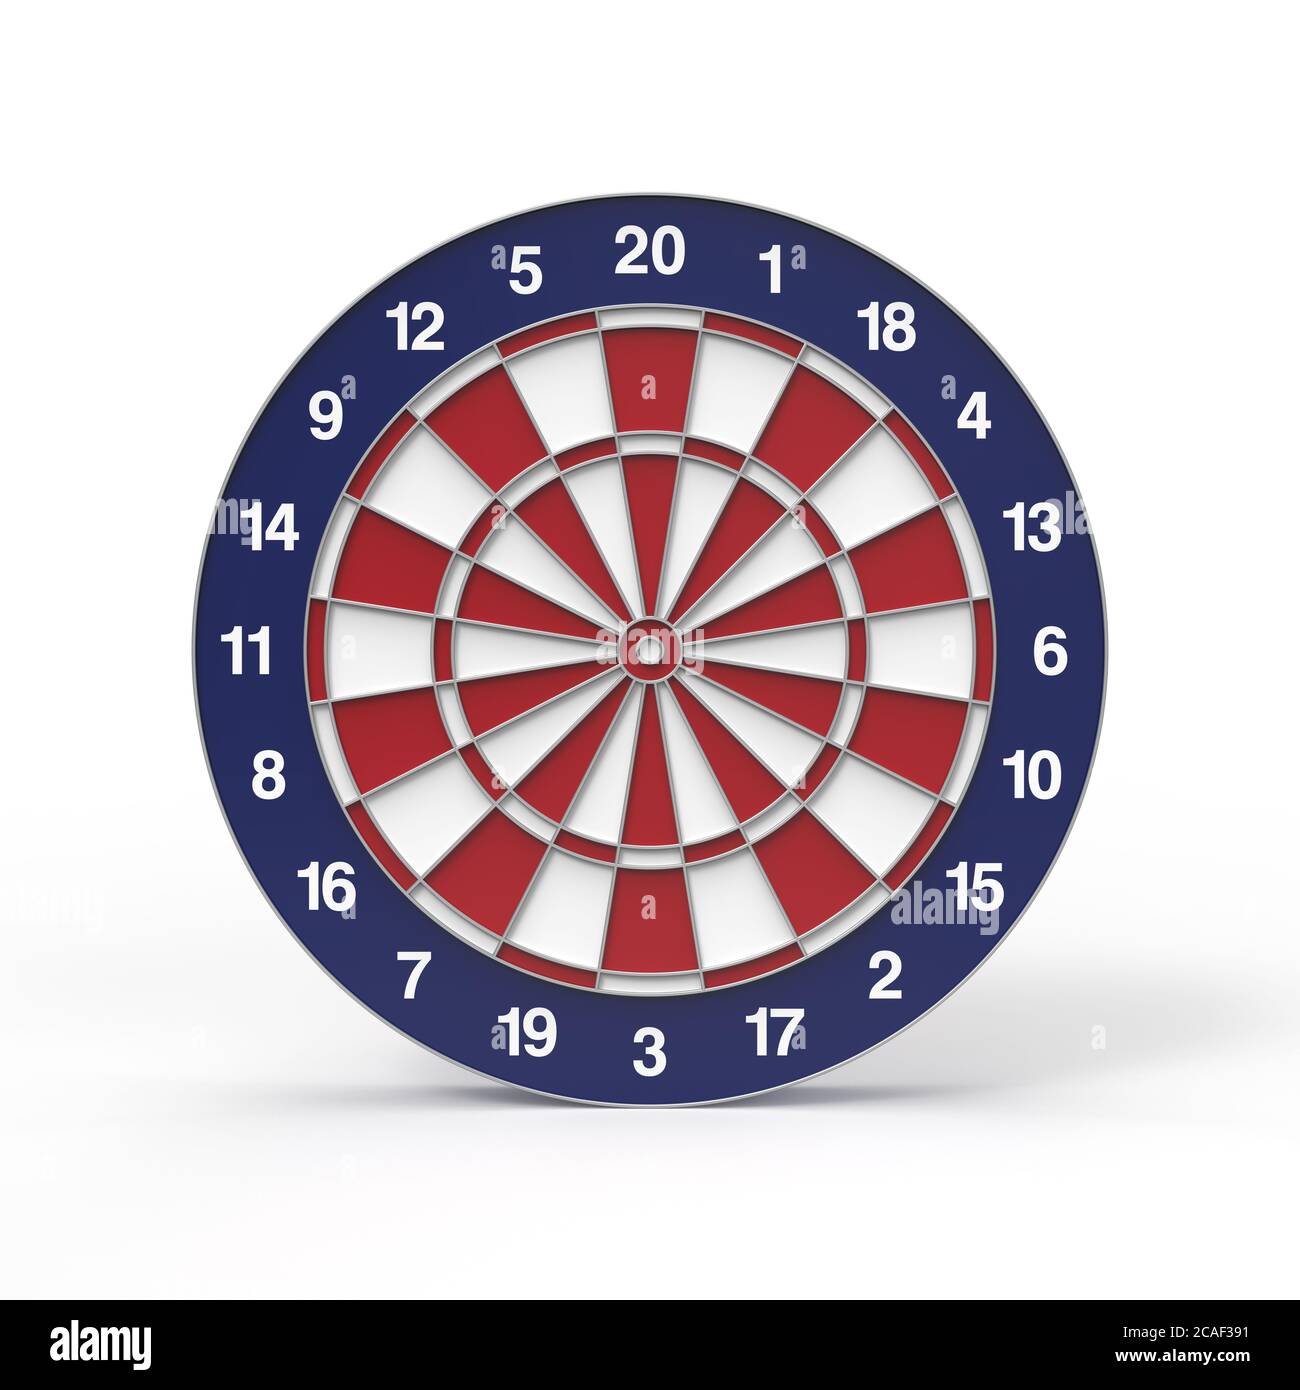 Dart board with red white and blue colors on a white background Stock Photo